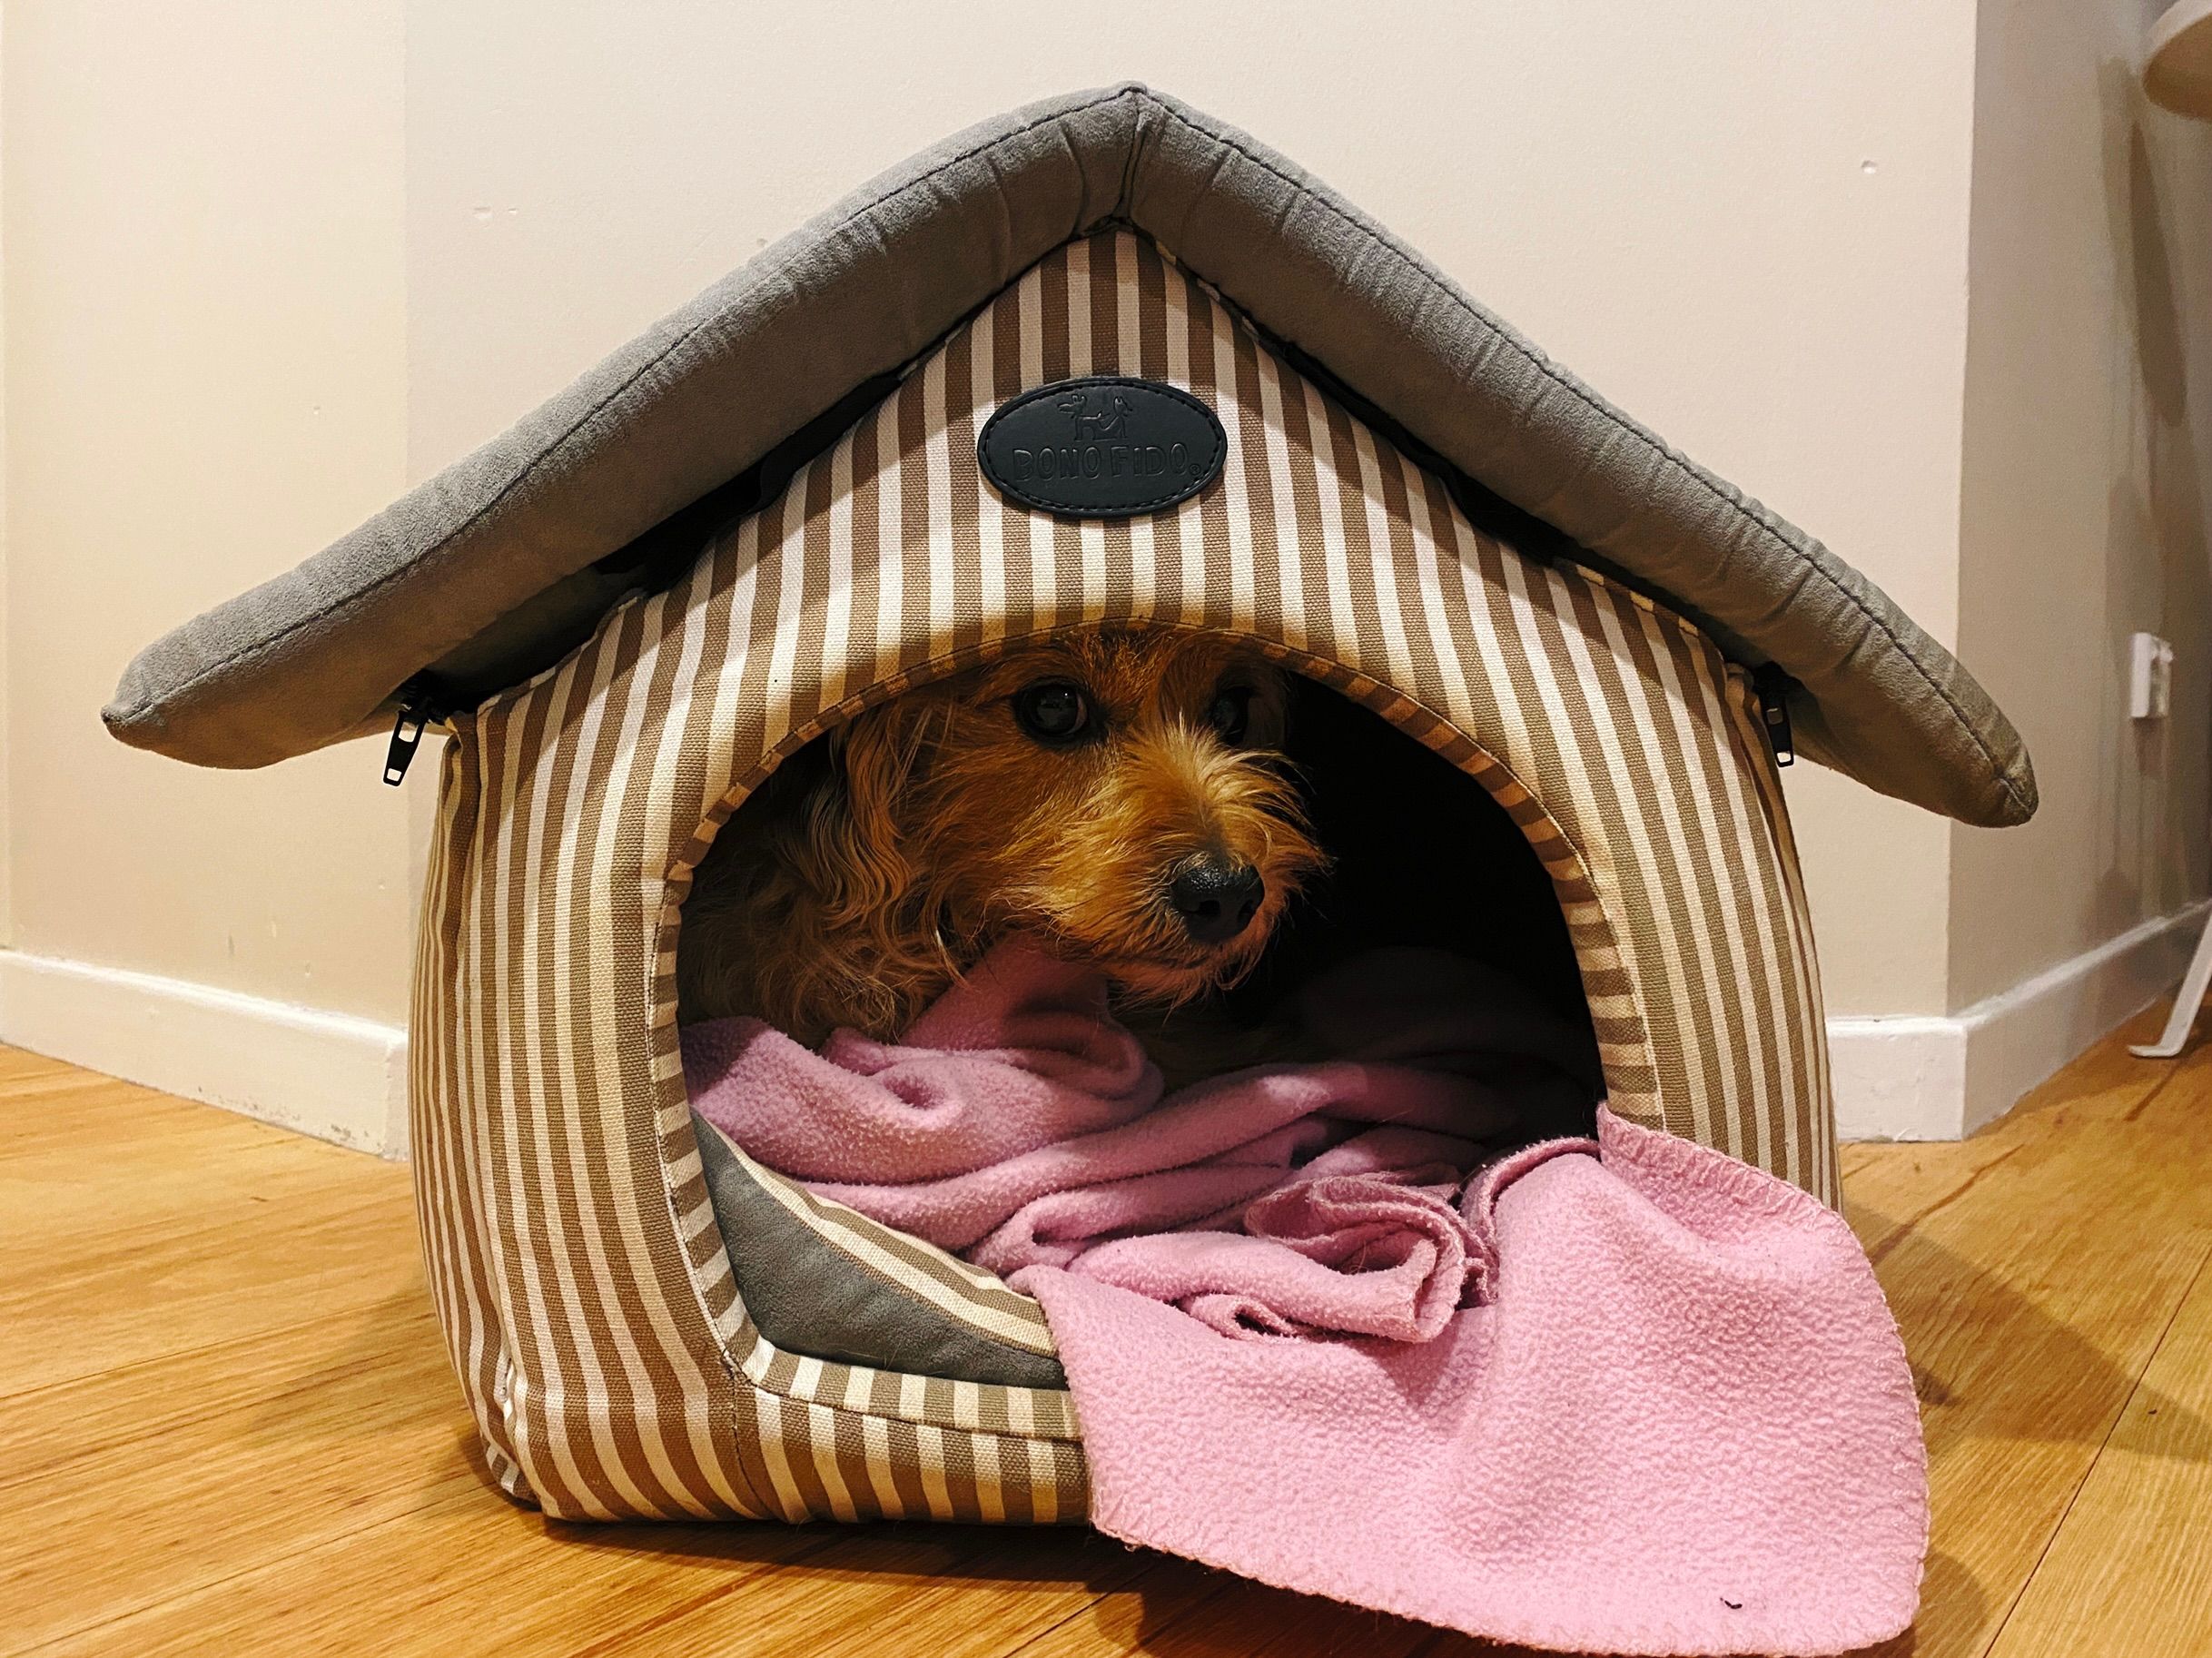 A photo of a kind of dog kennel, except it's soft and made of stripy fabric and is sitting indoors. A small scruffy blonde dog is lying inside it on top of a pink blanket, giving a funny look because he's not quite sure what I'm doing.